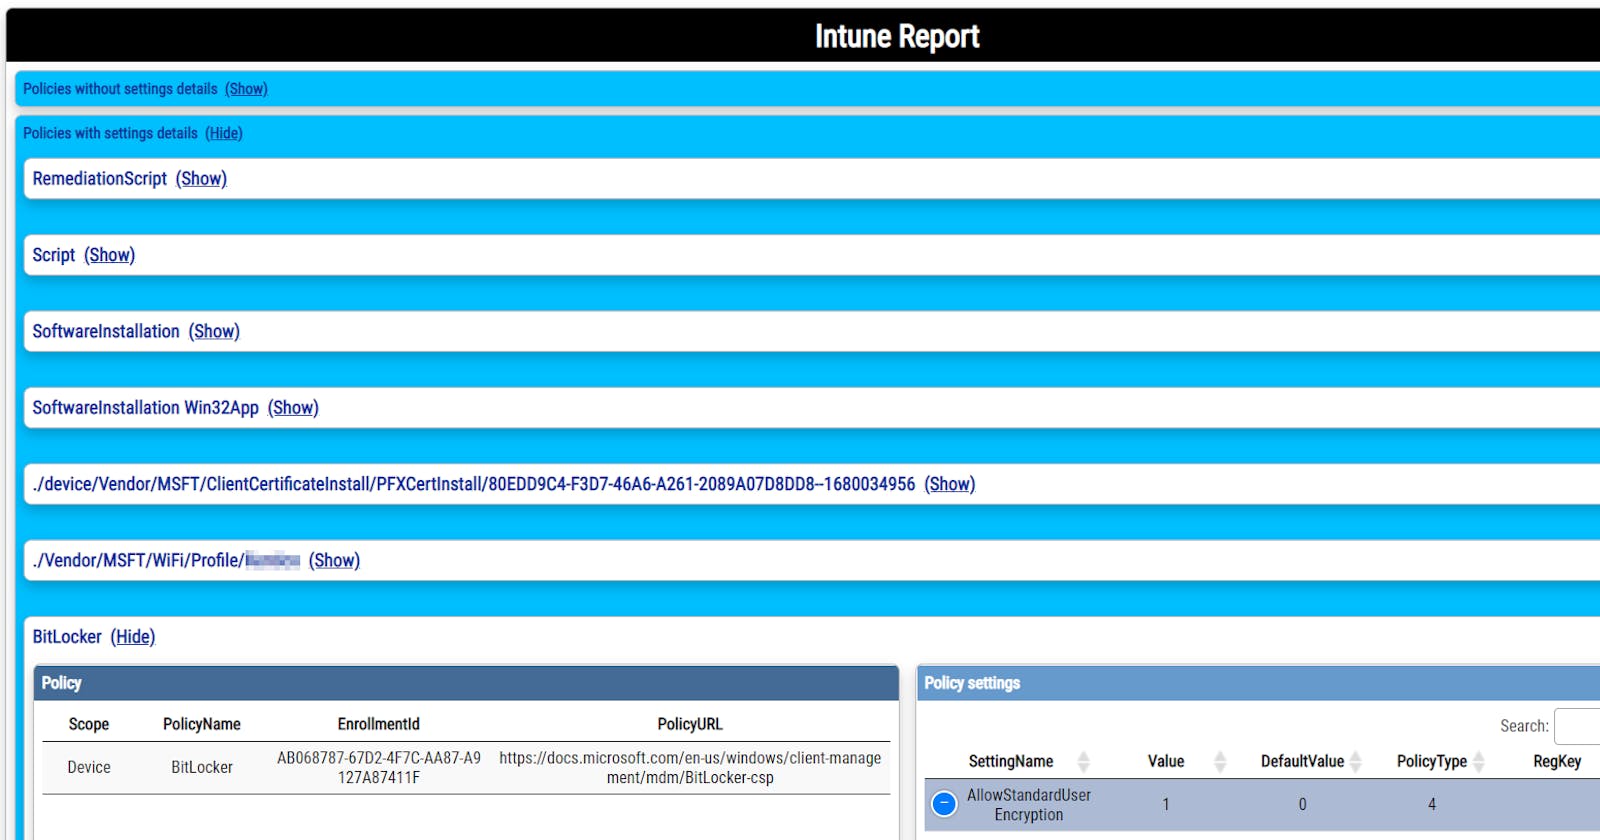 Get a better Intune policy report part 3. (FINAL)